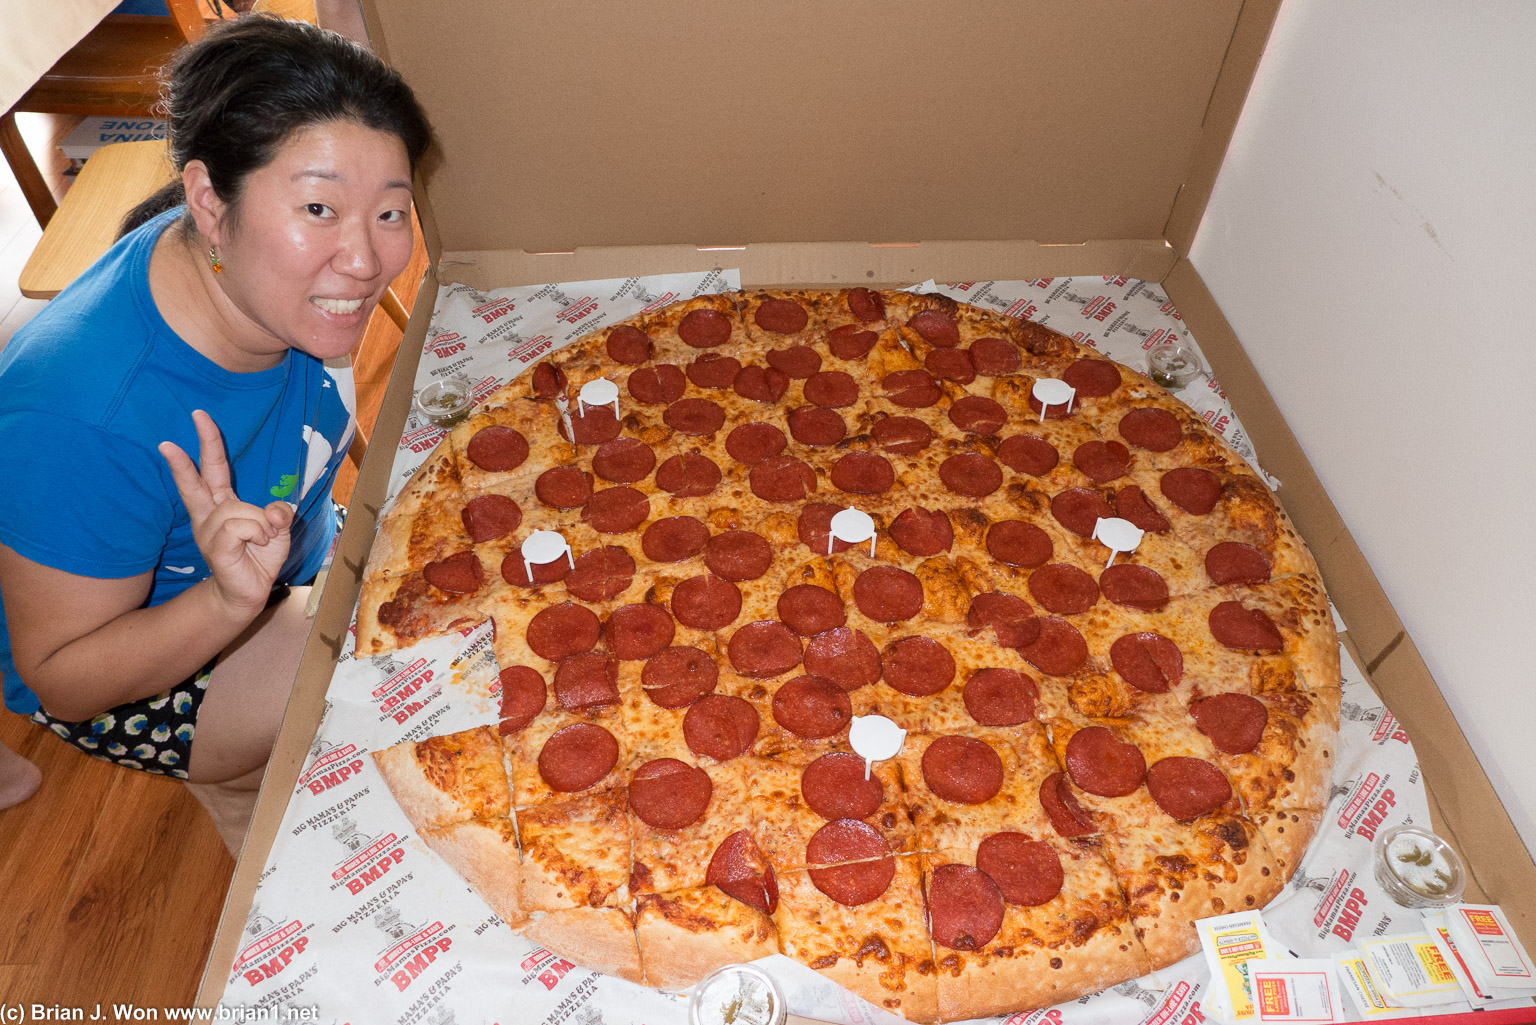 36" of pizza.